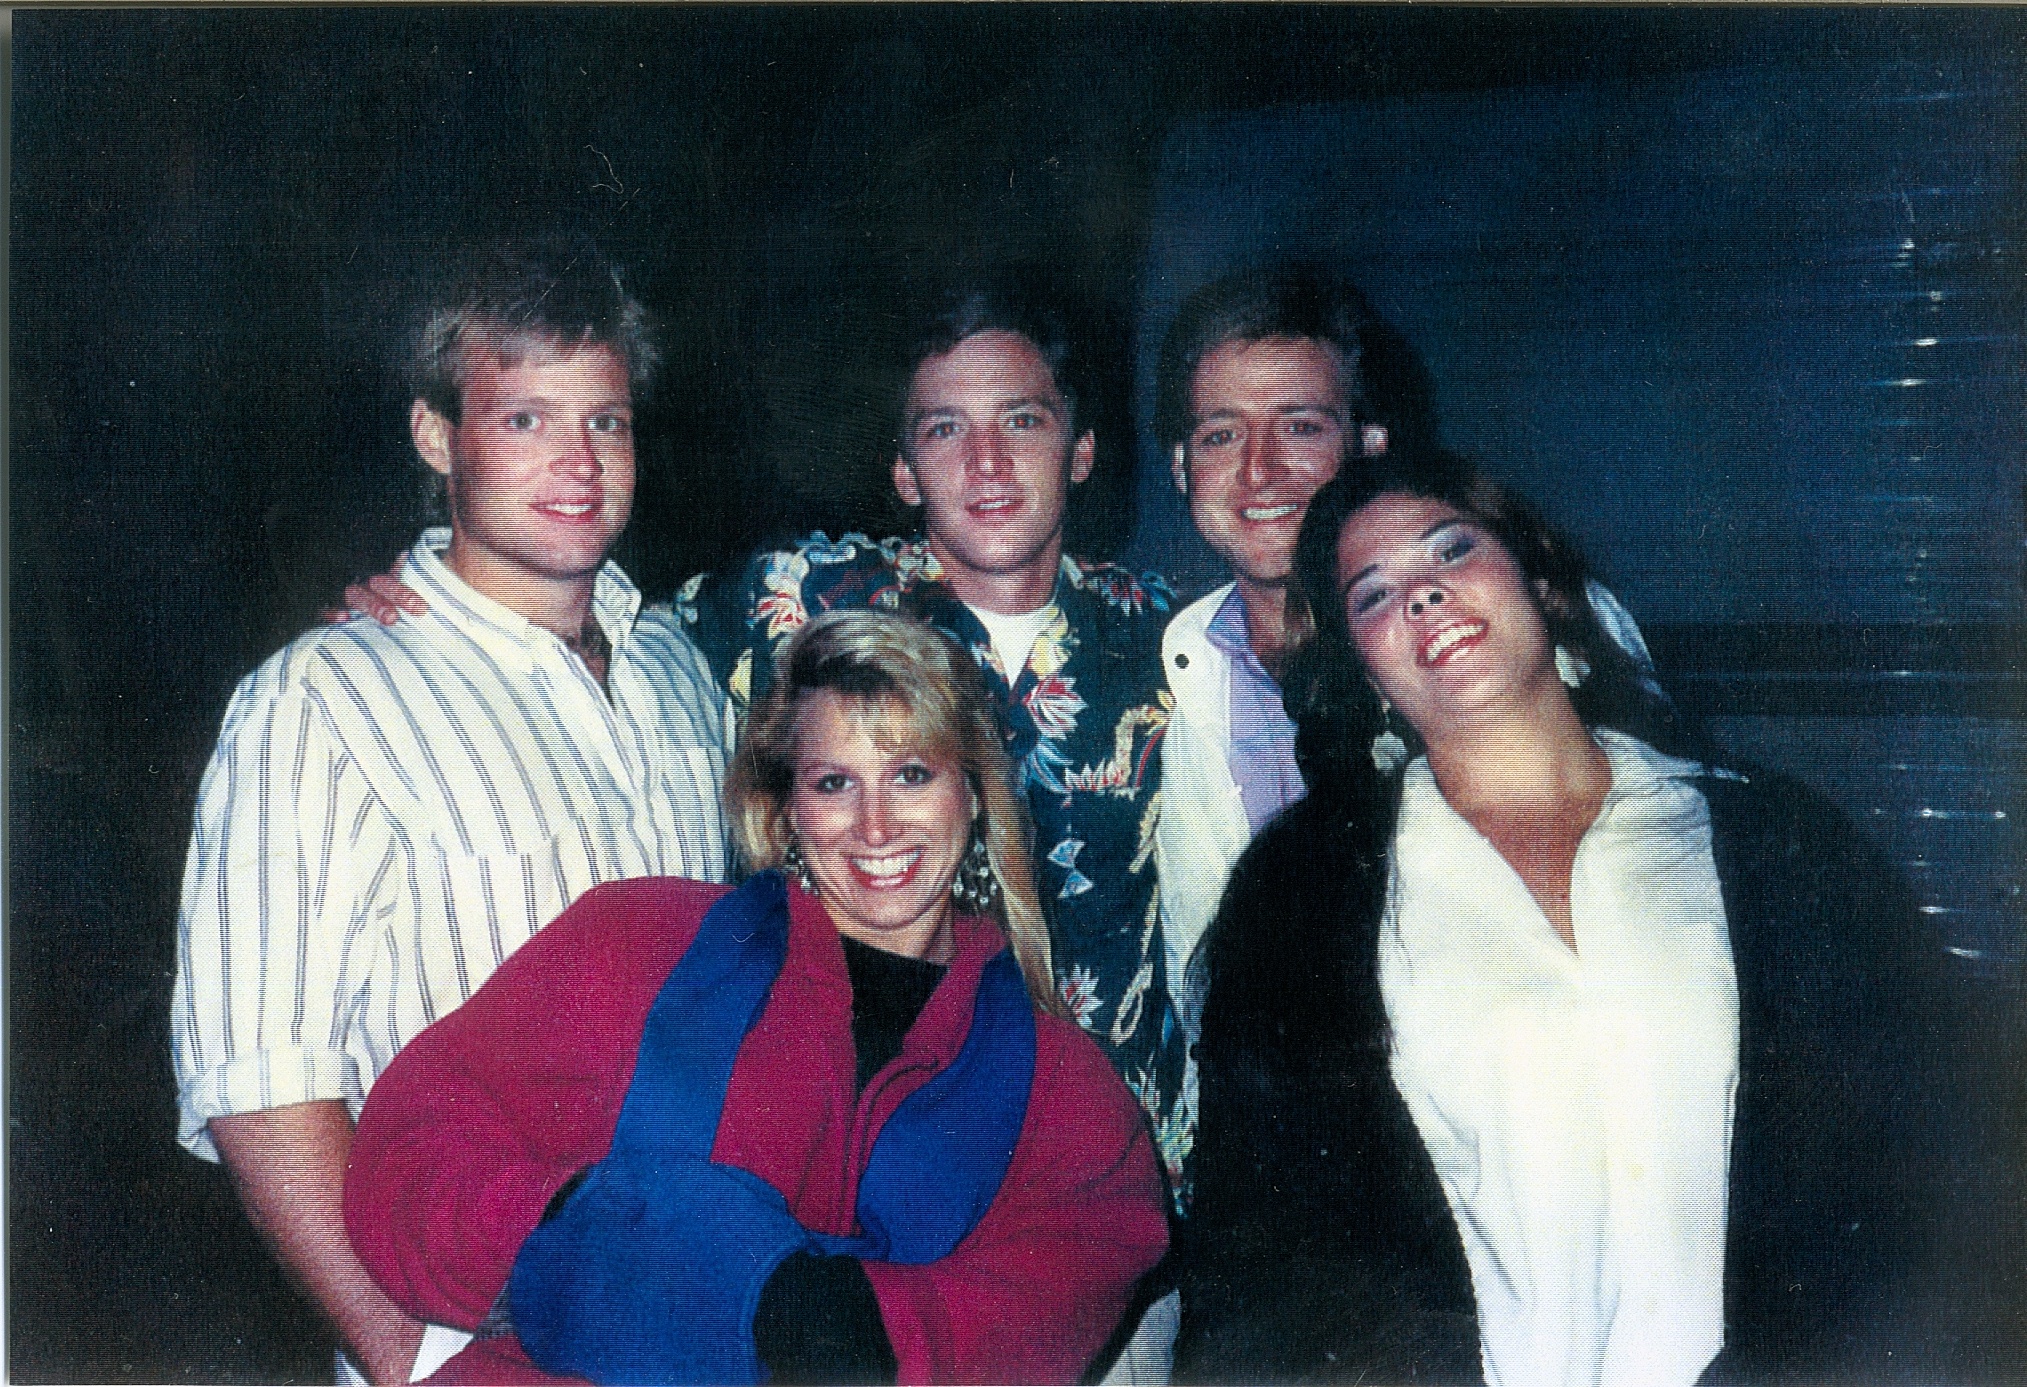 WEEKEND AT BERNIE'S: Patt Noday: (back right) relaxes on-set with real-life brother Kelly Naudet (far left) and Andrew McCarthy (back center) while filming scenes for the hilarious comedy 